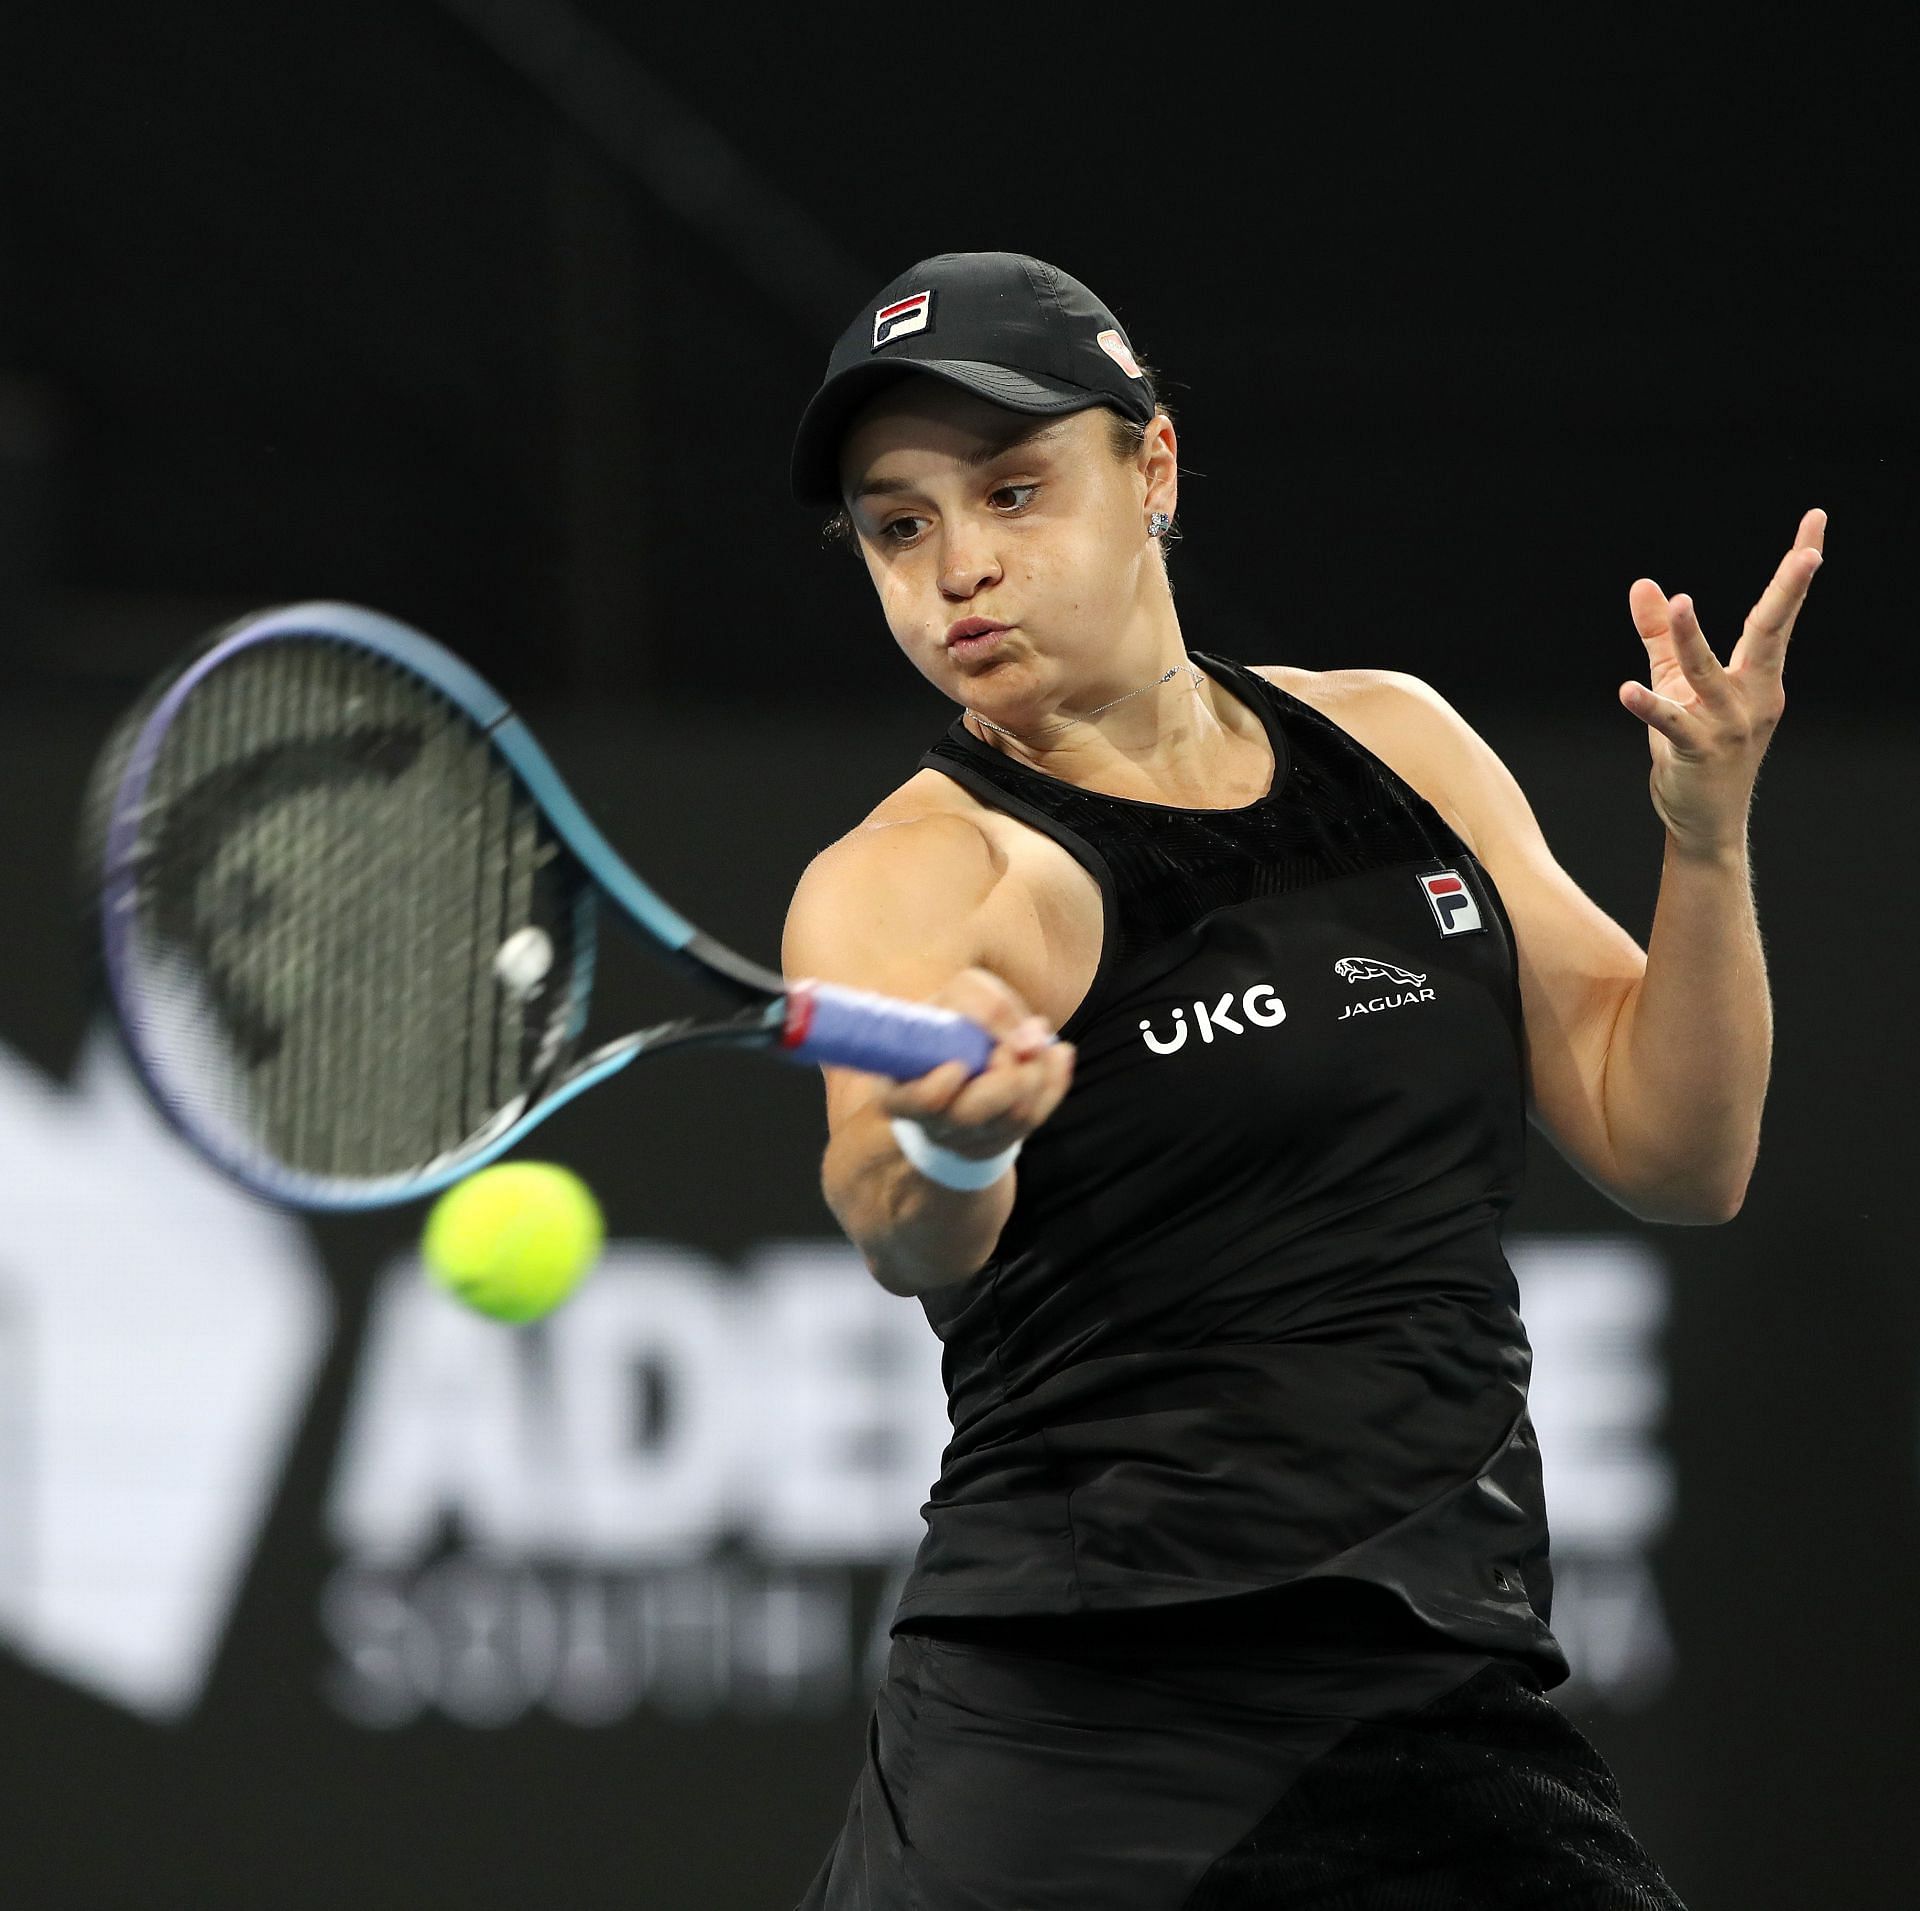 Ashleigh Barty cruised into the semifinals of the Adelaide International